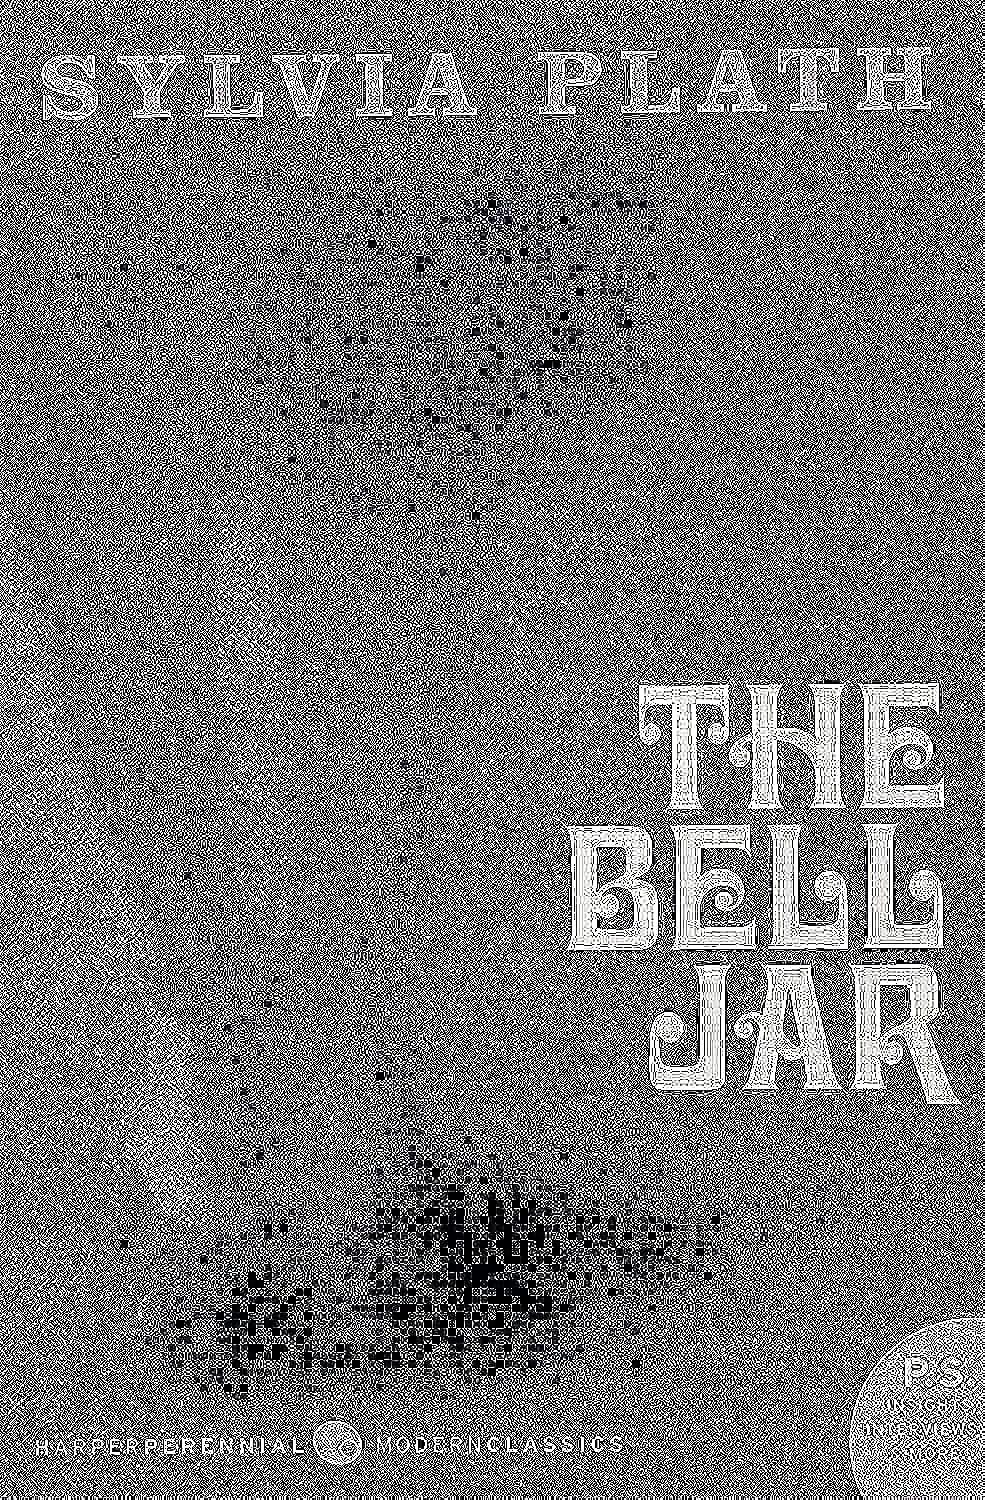 The Bell Jar Summary of Key Ideas and Review